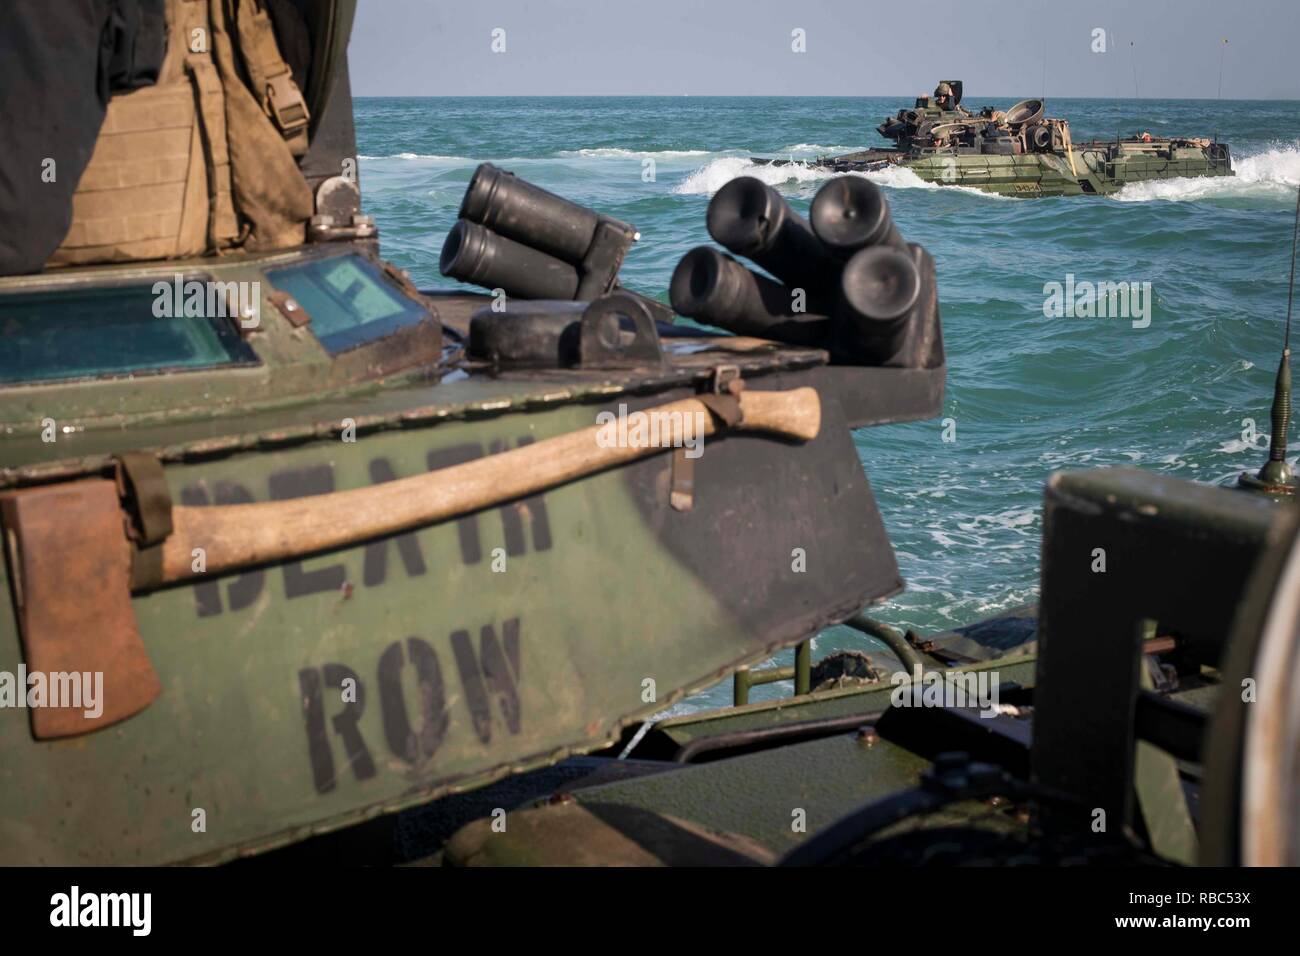 ARABIAN GULF - U.S. Marines with Kilo Company, Battalion Landing Team 3/1, 13th Marine Expeditionary Unit (MEU), steer through the water with their amphibious assault vehicles, Nov. 29, 2018. The Essex Amphibious Ready Group and the 13th MEU are deployed to the U.S. 5th Fleet area of operations in support of naval operations to ensure maritime stability and security in the Central Region, connecting the Mediterranean and the Pacific through the western Indian Ocean and three strategic choke points. (U.S. Marine Corps photo by Cpl. Danny Gonzalez/Released) Stock Photo